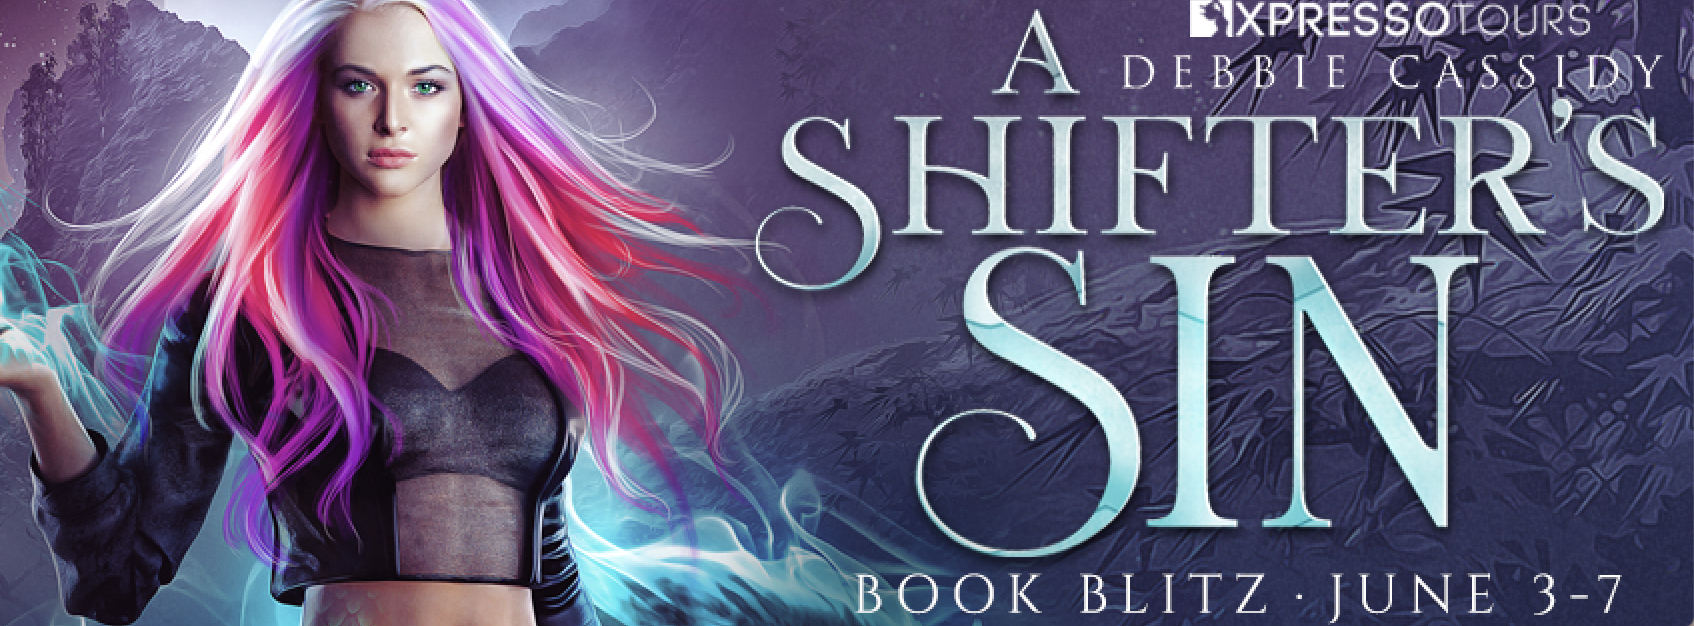 A Shifter’s Sin by Debbie Cassidy – Blitz & Giveaway